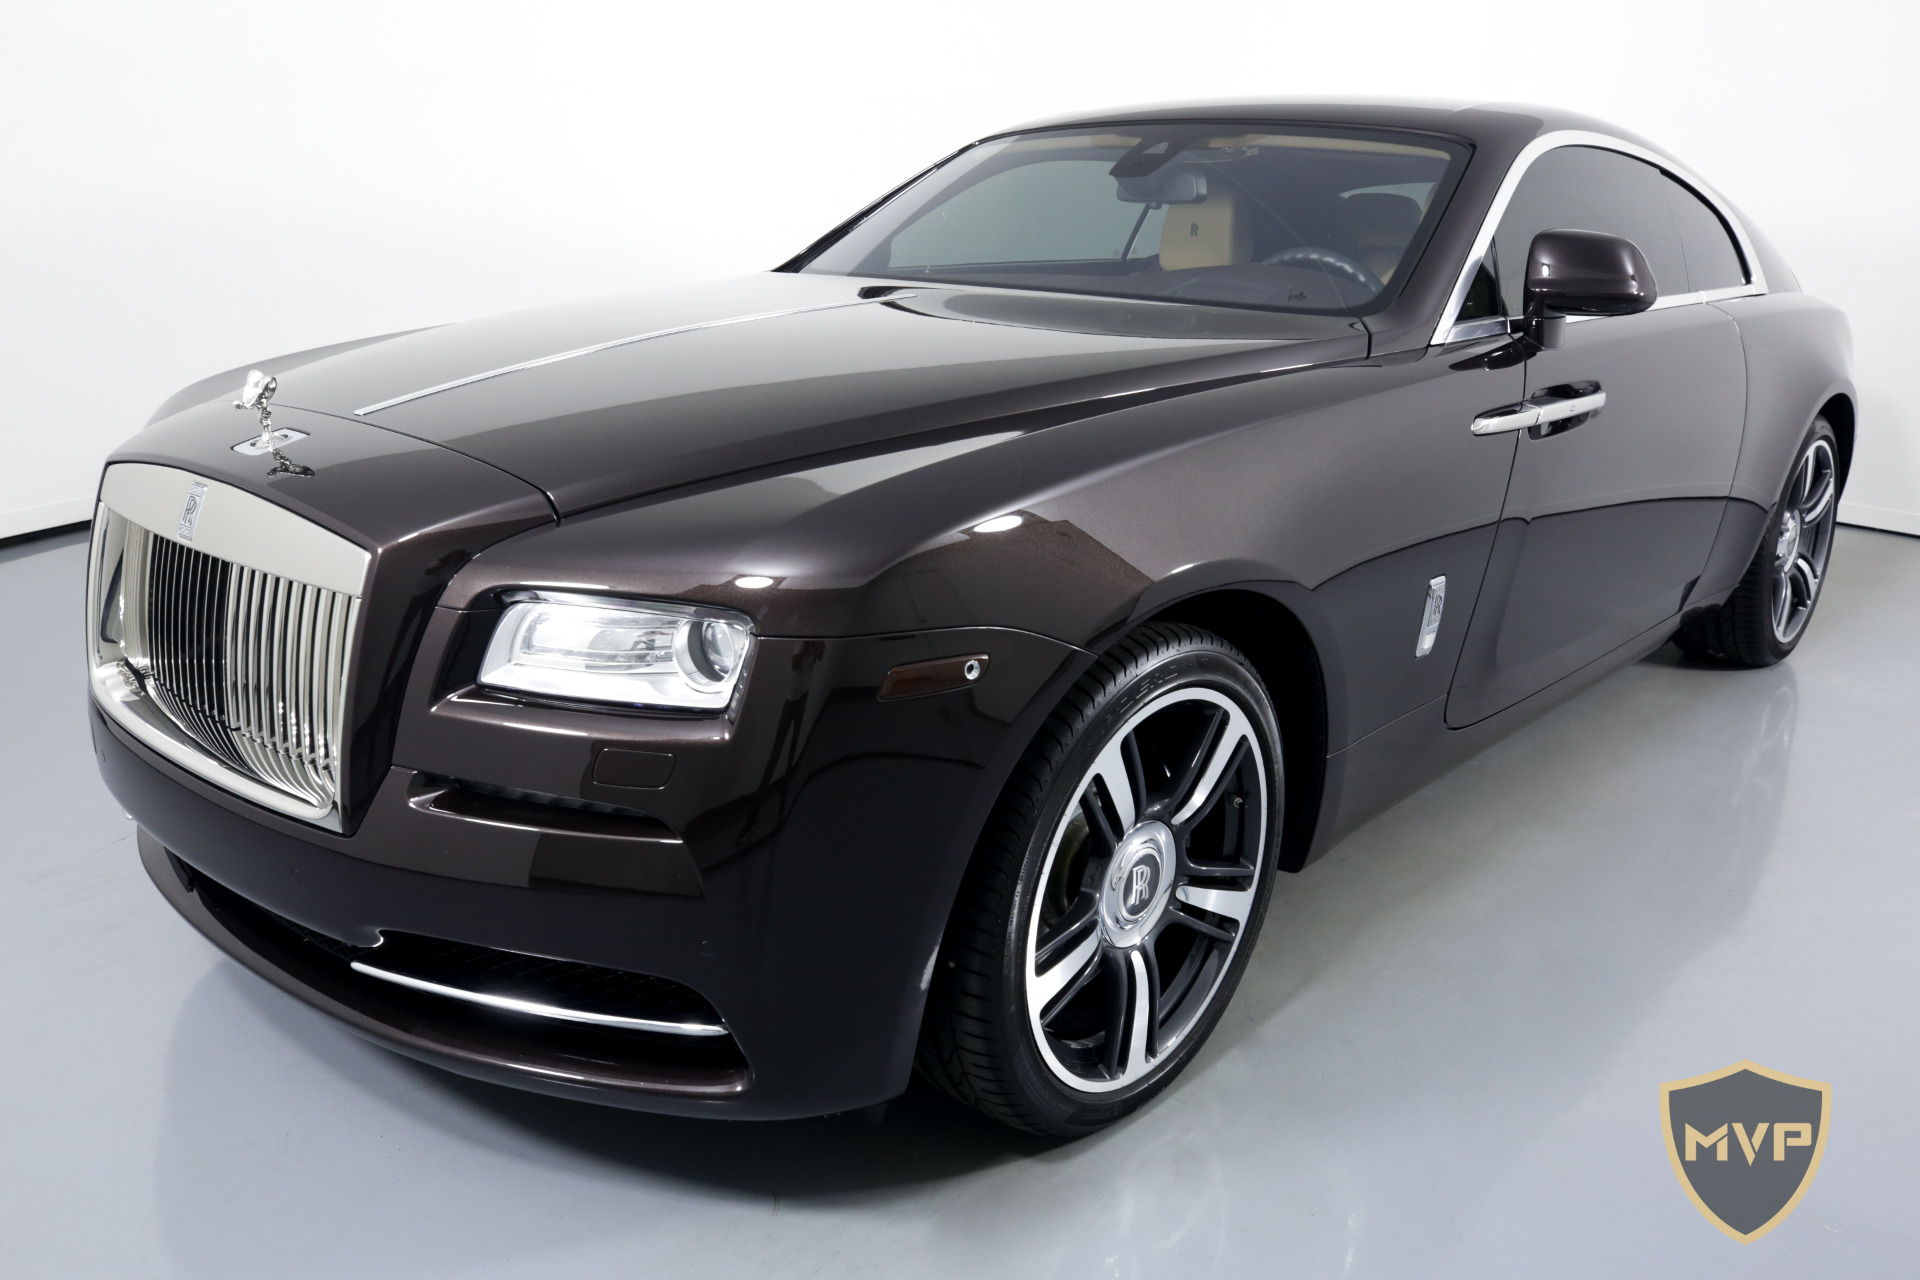 RollsRoyce Wraith 2016 Review  carsalescomau